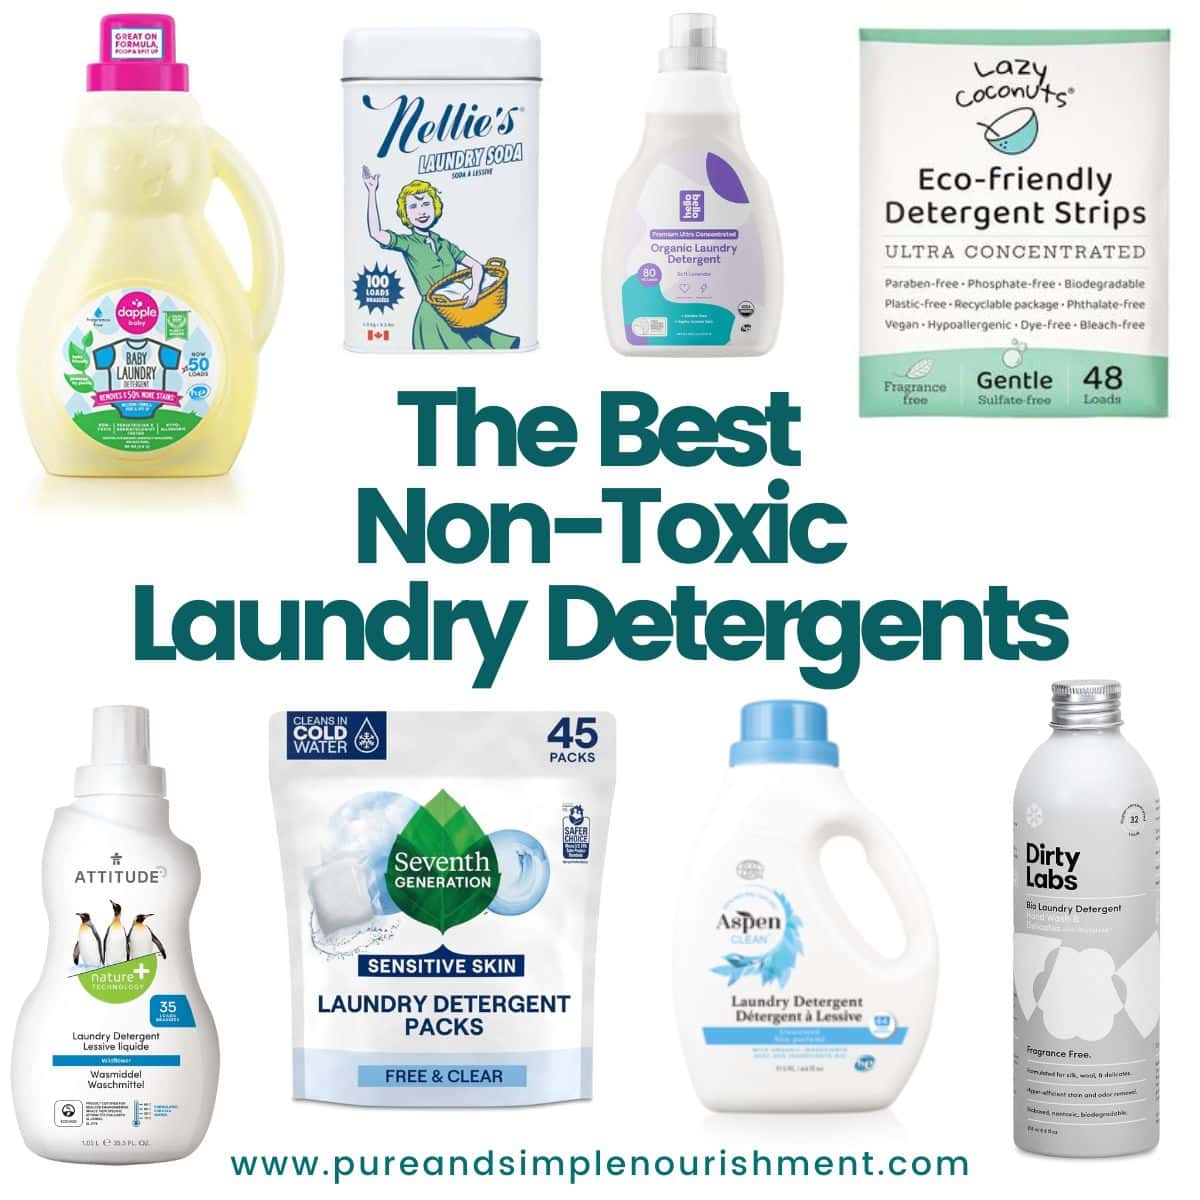 A collection of many different laundry detergents with the title "The Best Non-Toxic Laundry Detergents" over them.